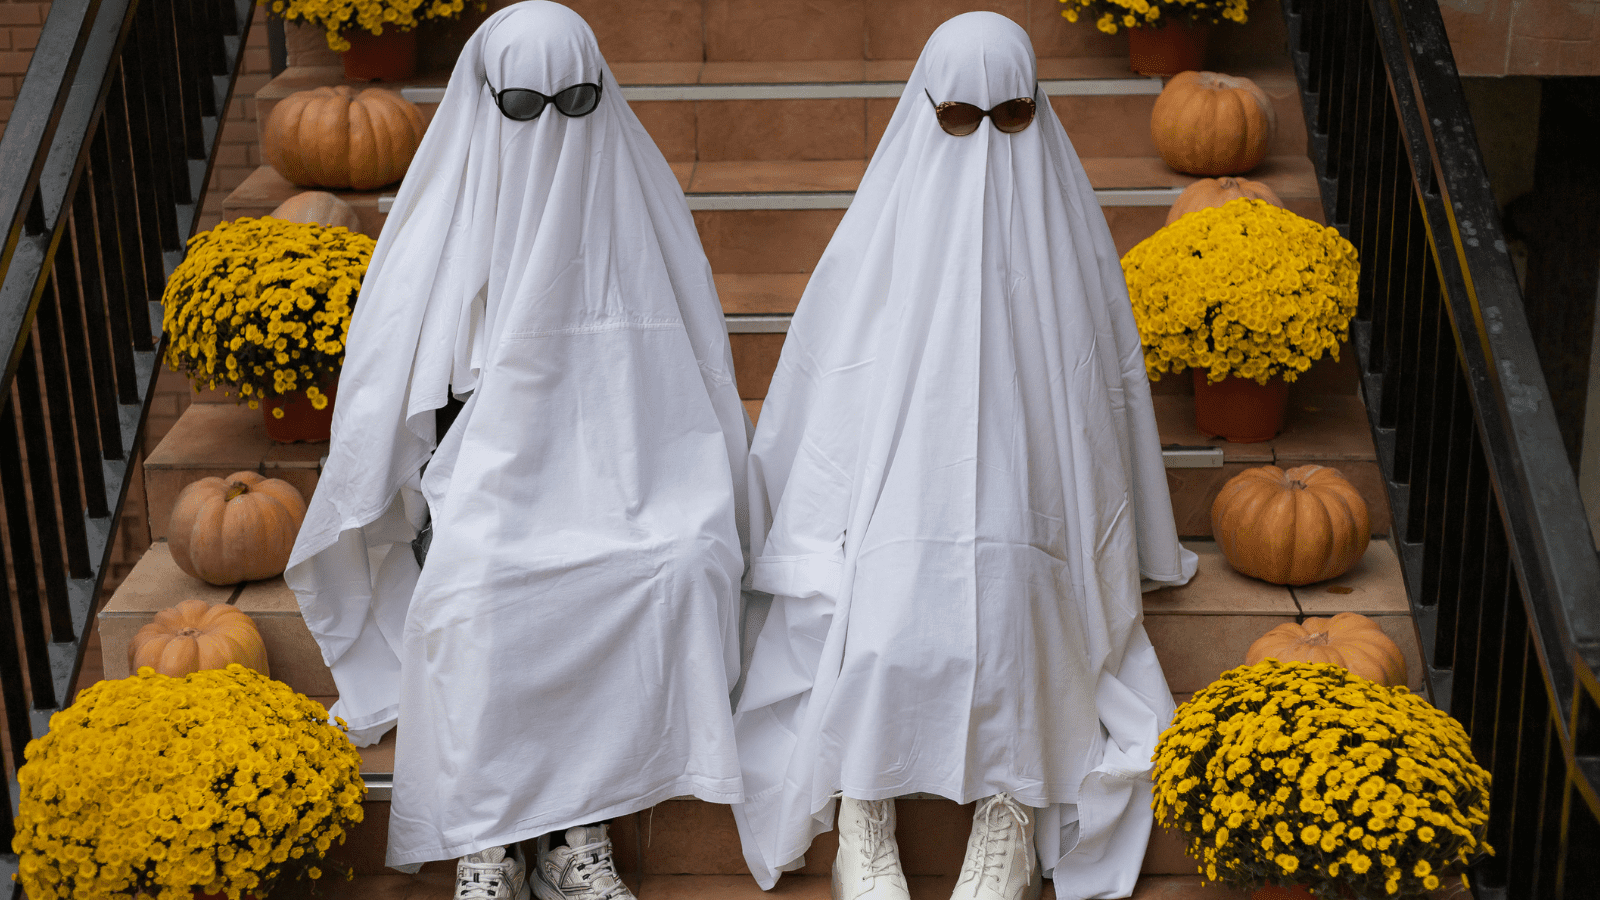 Trendy entertainment is to dress in white bedspreads or sheets symbolically depicting ghosts. Ghost Challenge